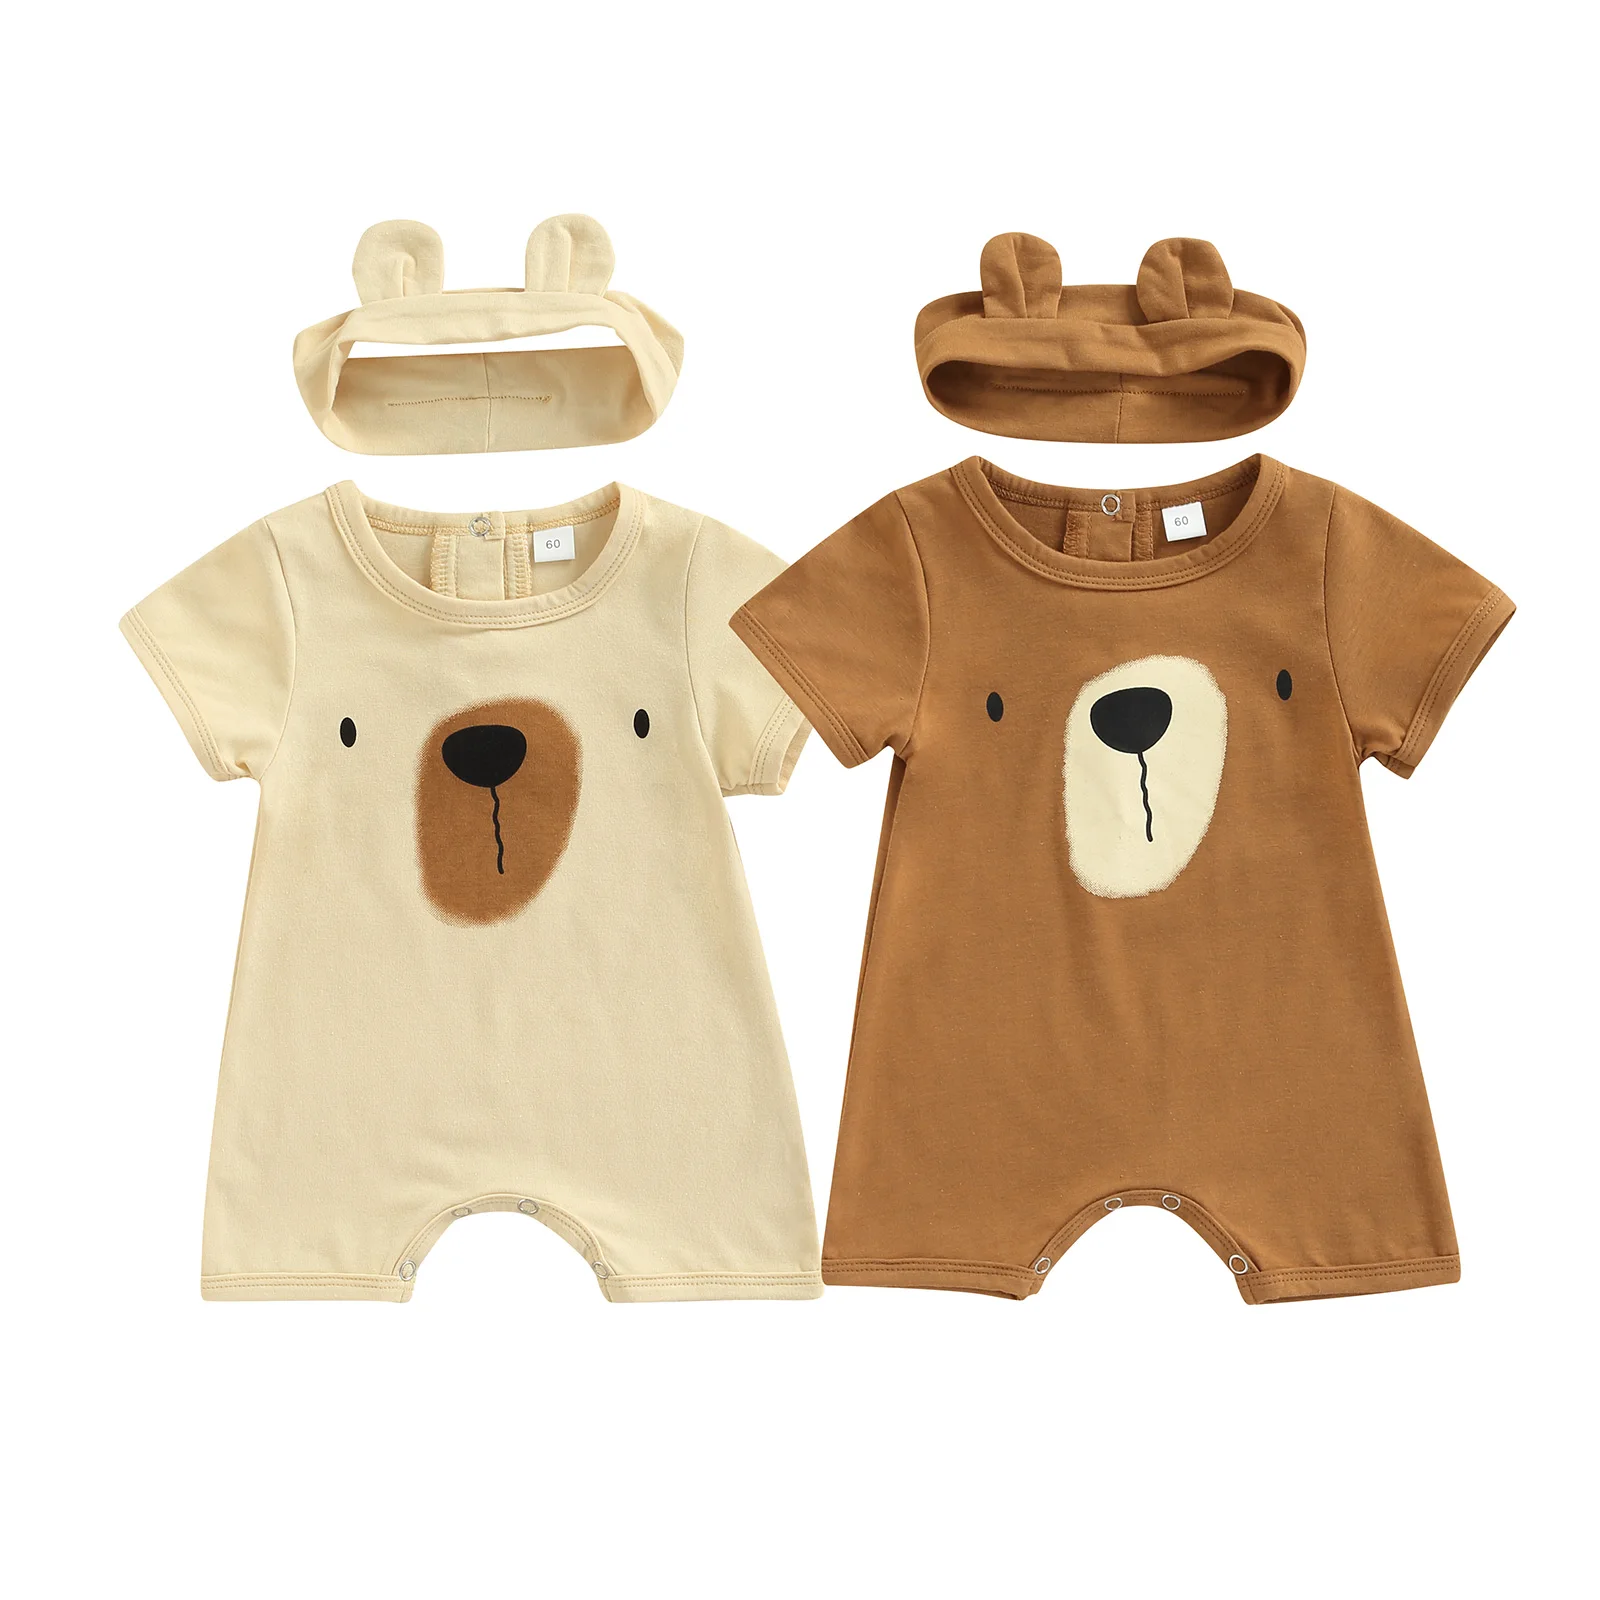 Ma&Baby 0-18M NewbornToddler Infant Baby Boy Girl Jumpsuit Cartoon Bear Romper Summer Clothes Ear Headband Outfits Costumes D01 cool baby bodysuits	